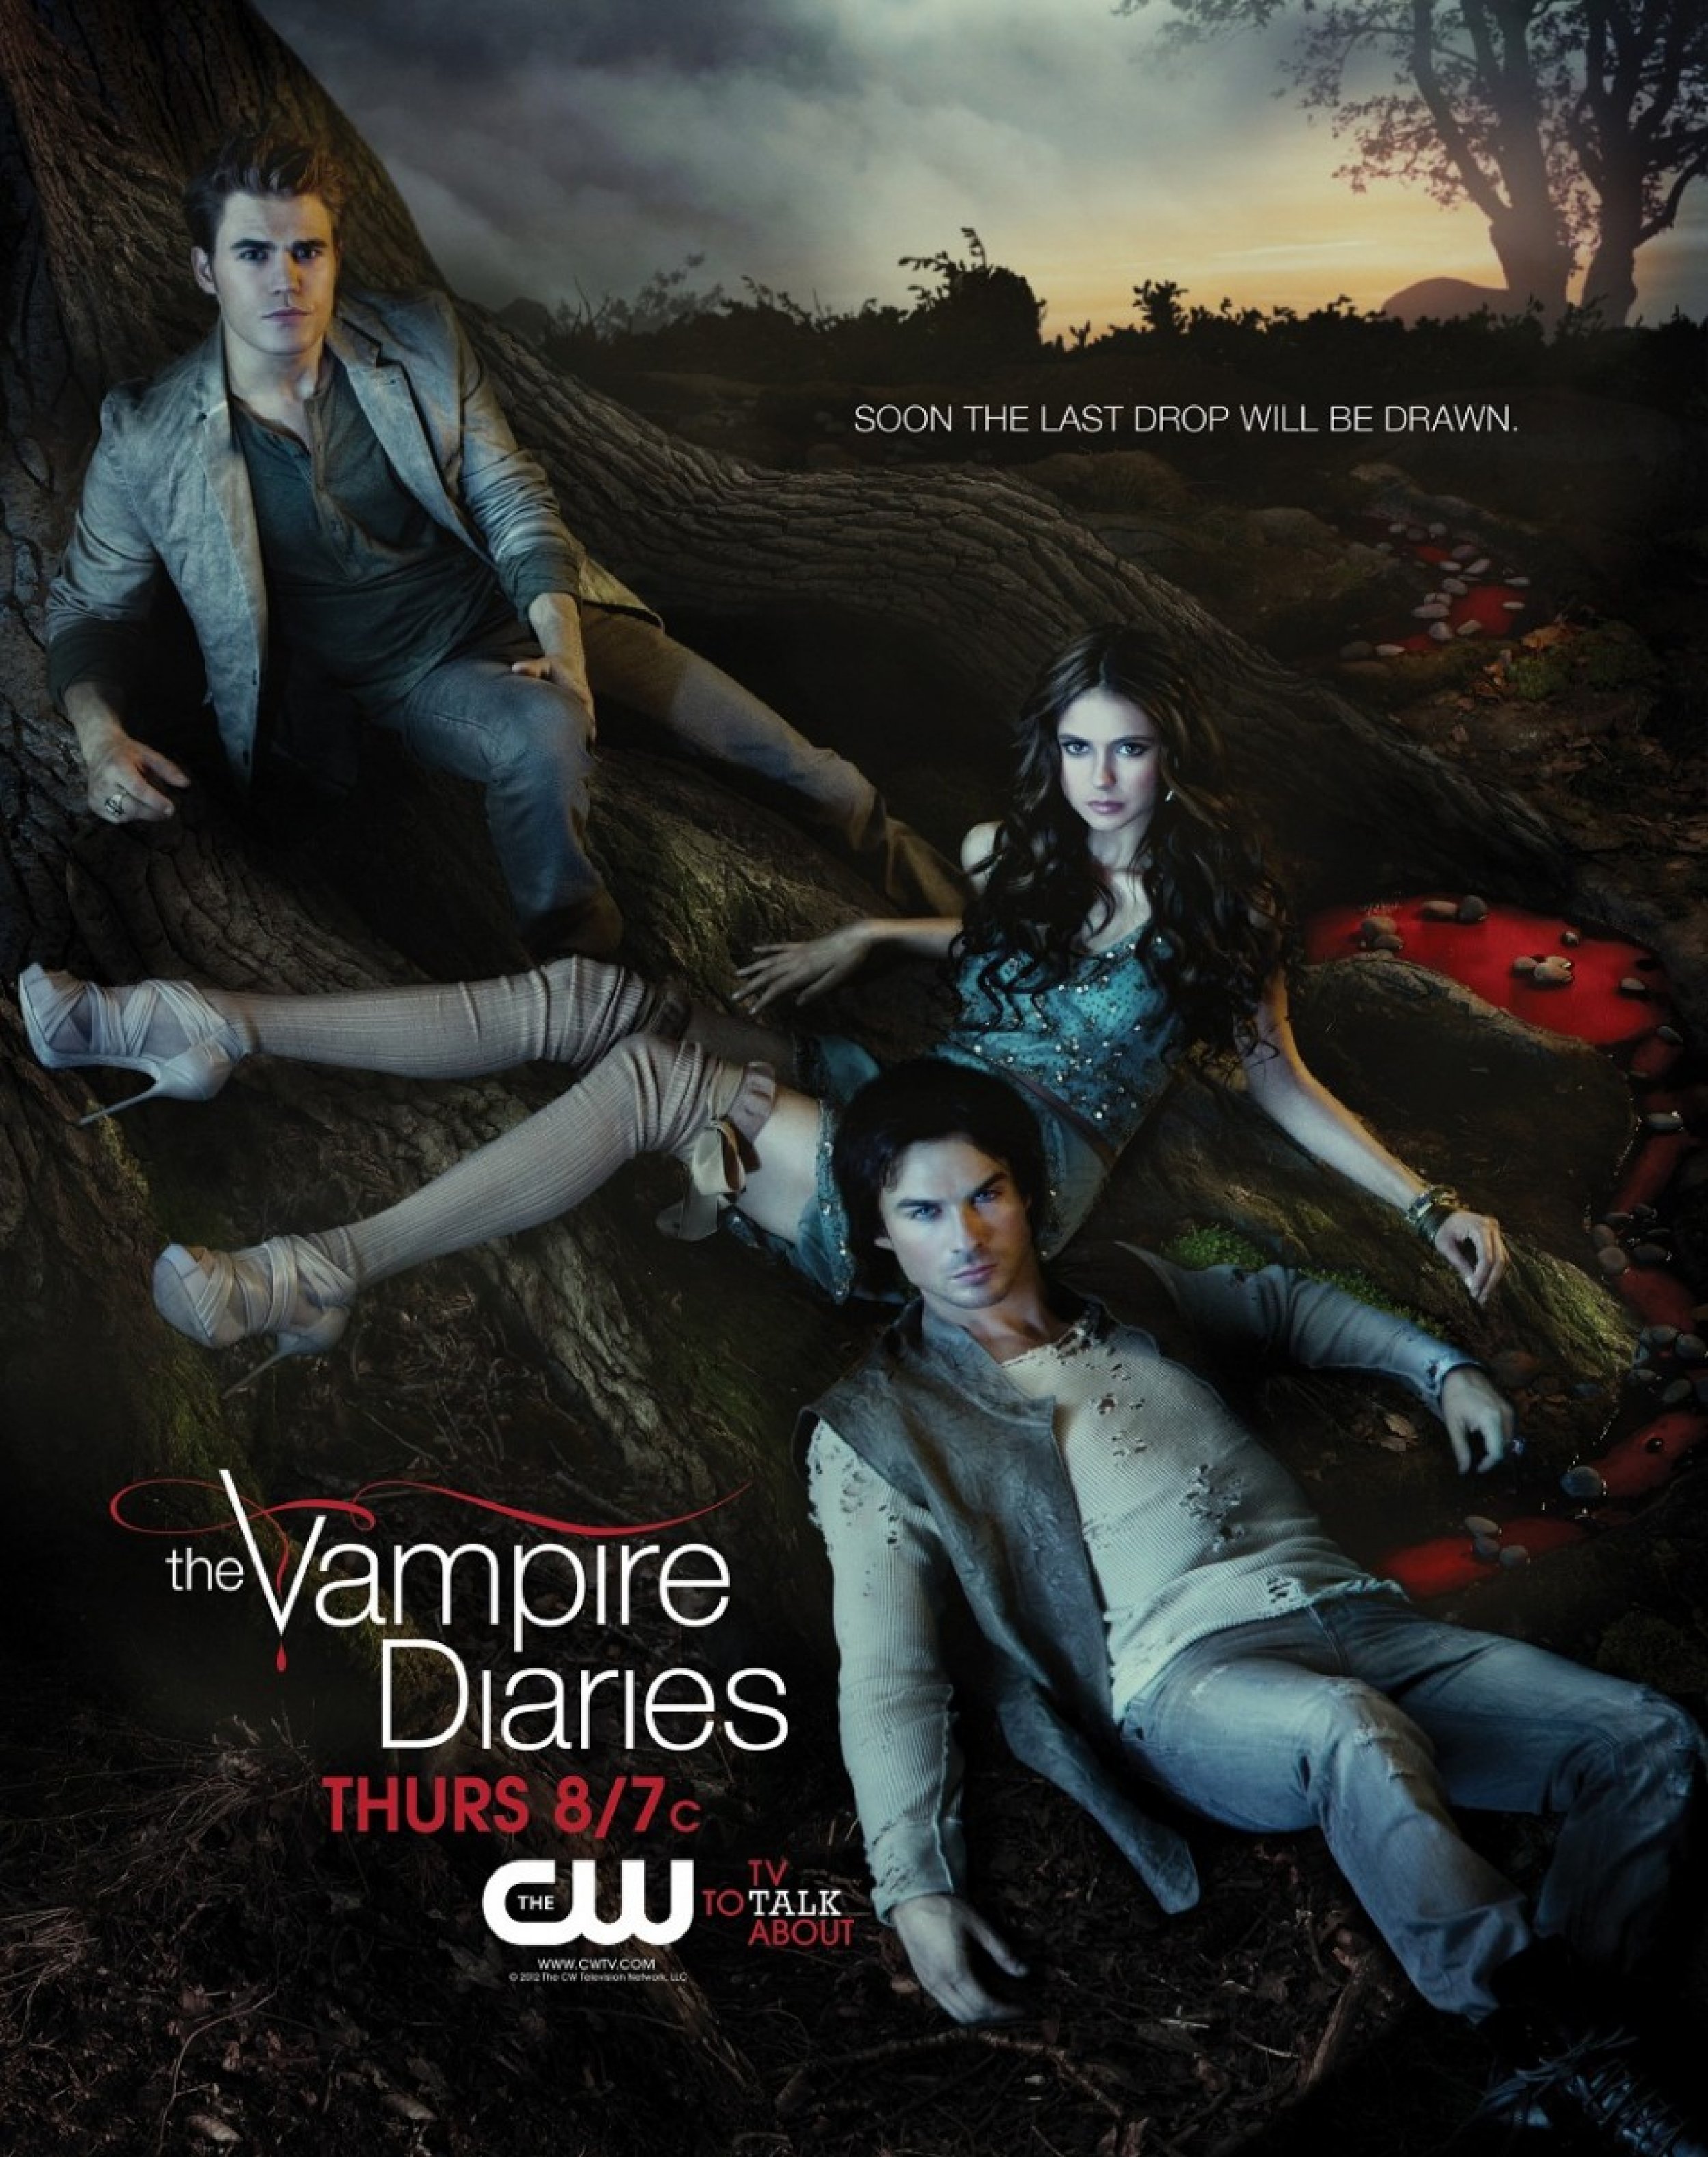 The Vampire Diaries 3x13: Bringing Out the Dead - Seriadores Anônimos